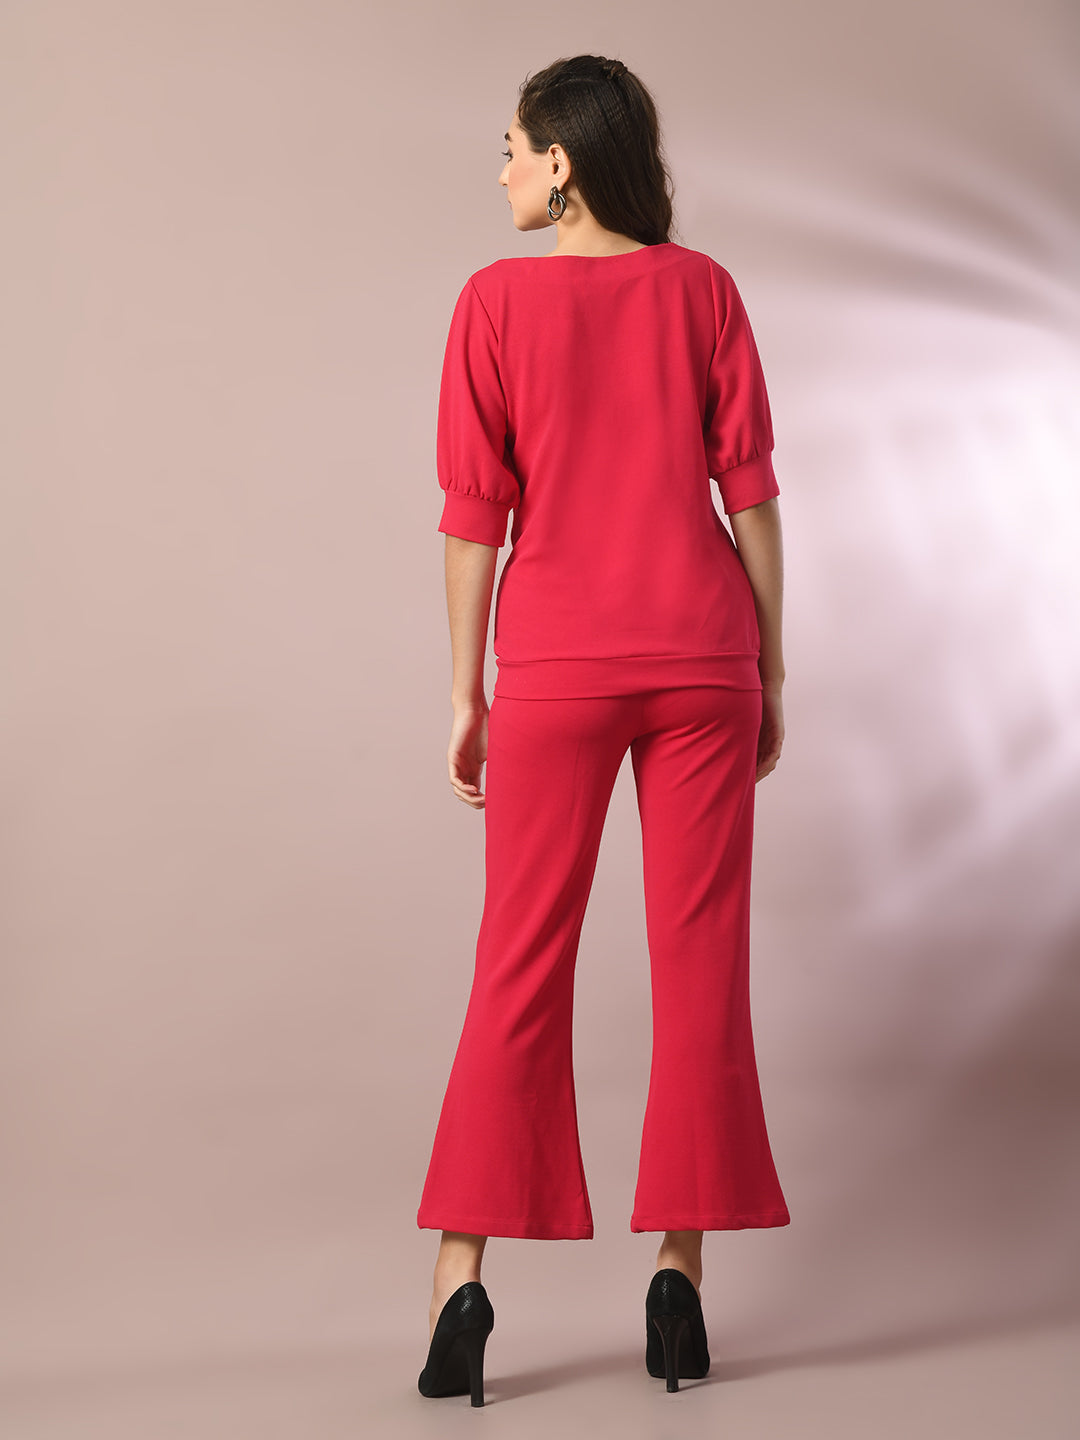 Women's  Pink Solid Party Parallel Trousers   - Myshka